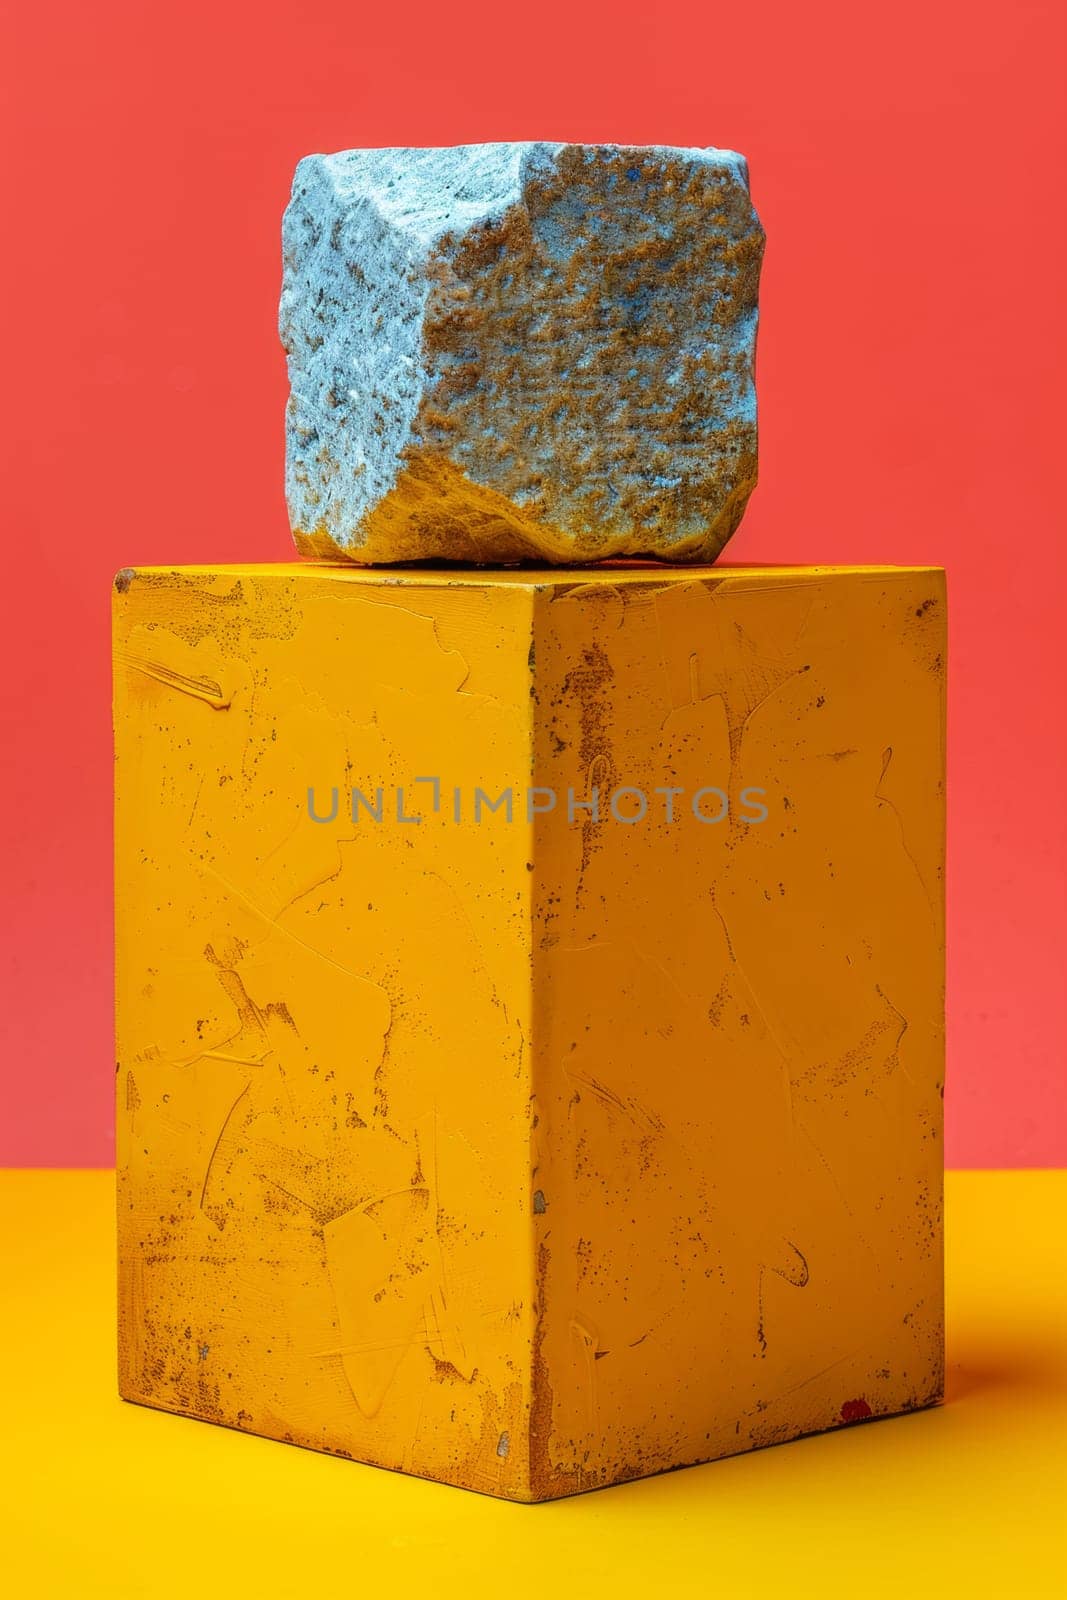 A large rock sitting on top of a yellow block